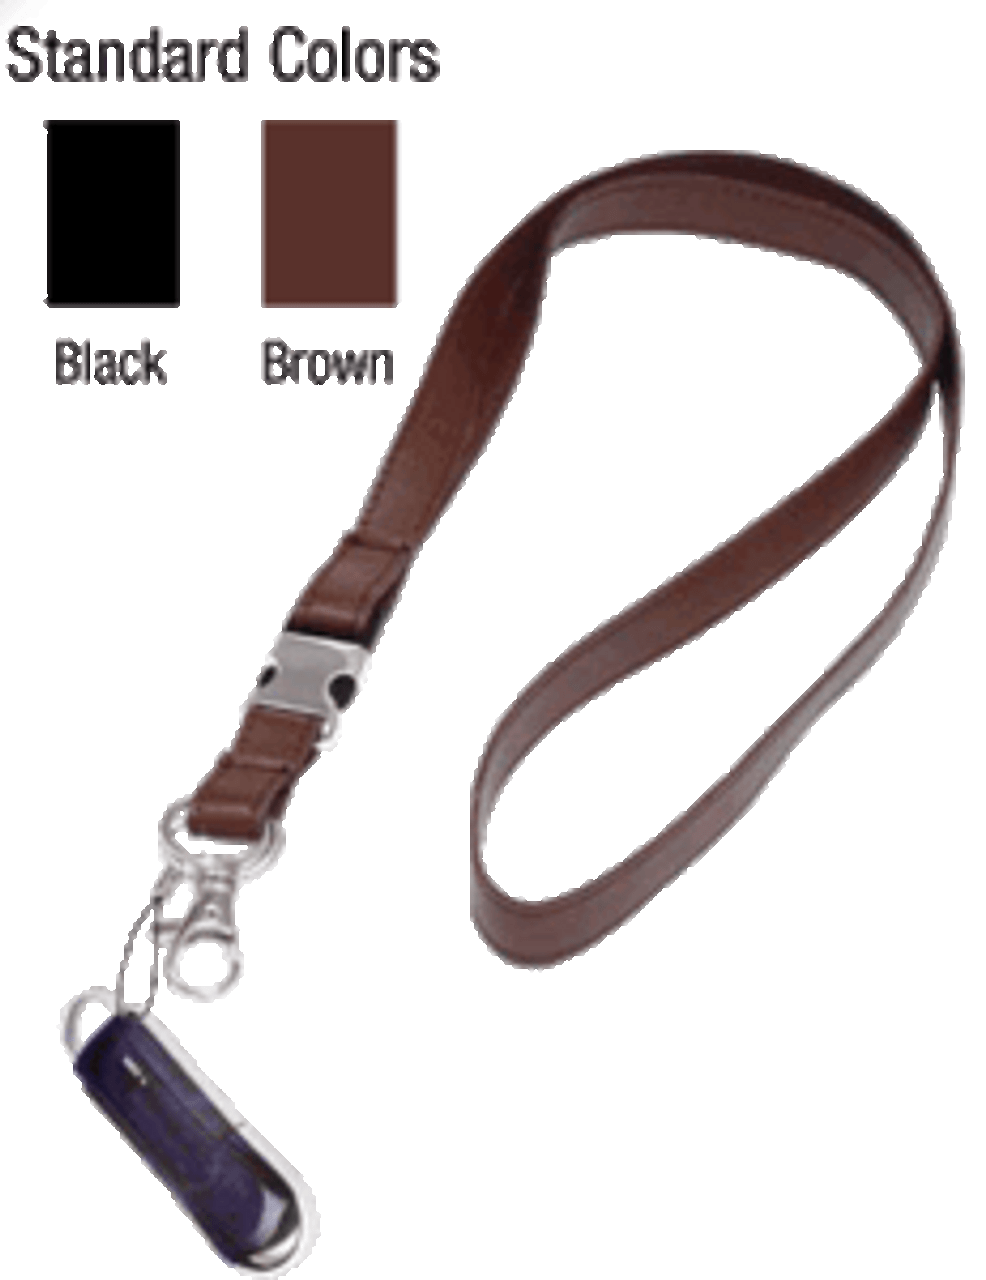 2130-1560 yourstyle Imitation Leather Lanyard Badge Card Holder - Black -  Detachable Trigger Hook, Cell Phone Attachment 